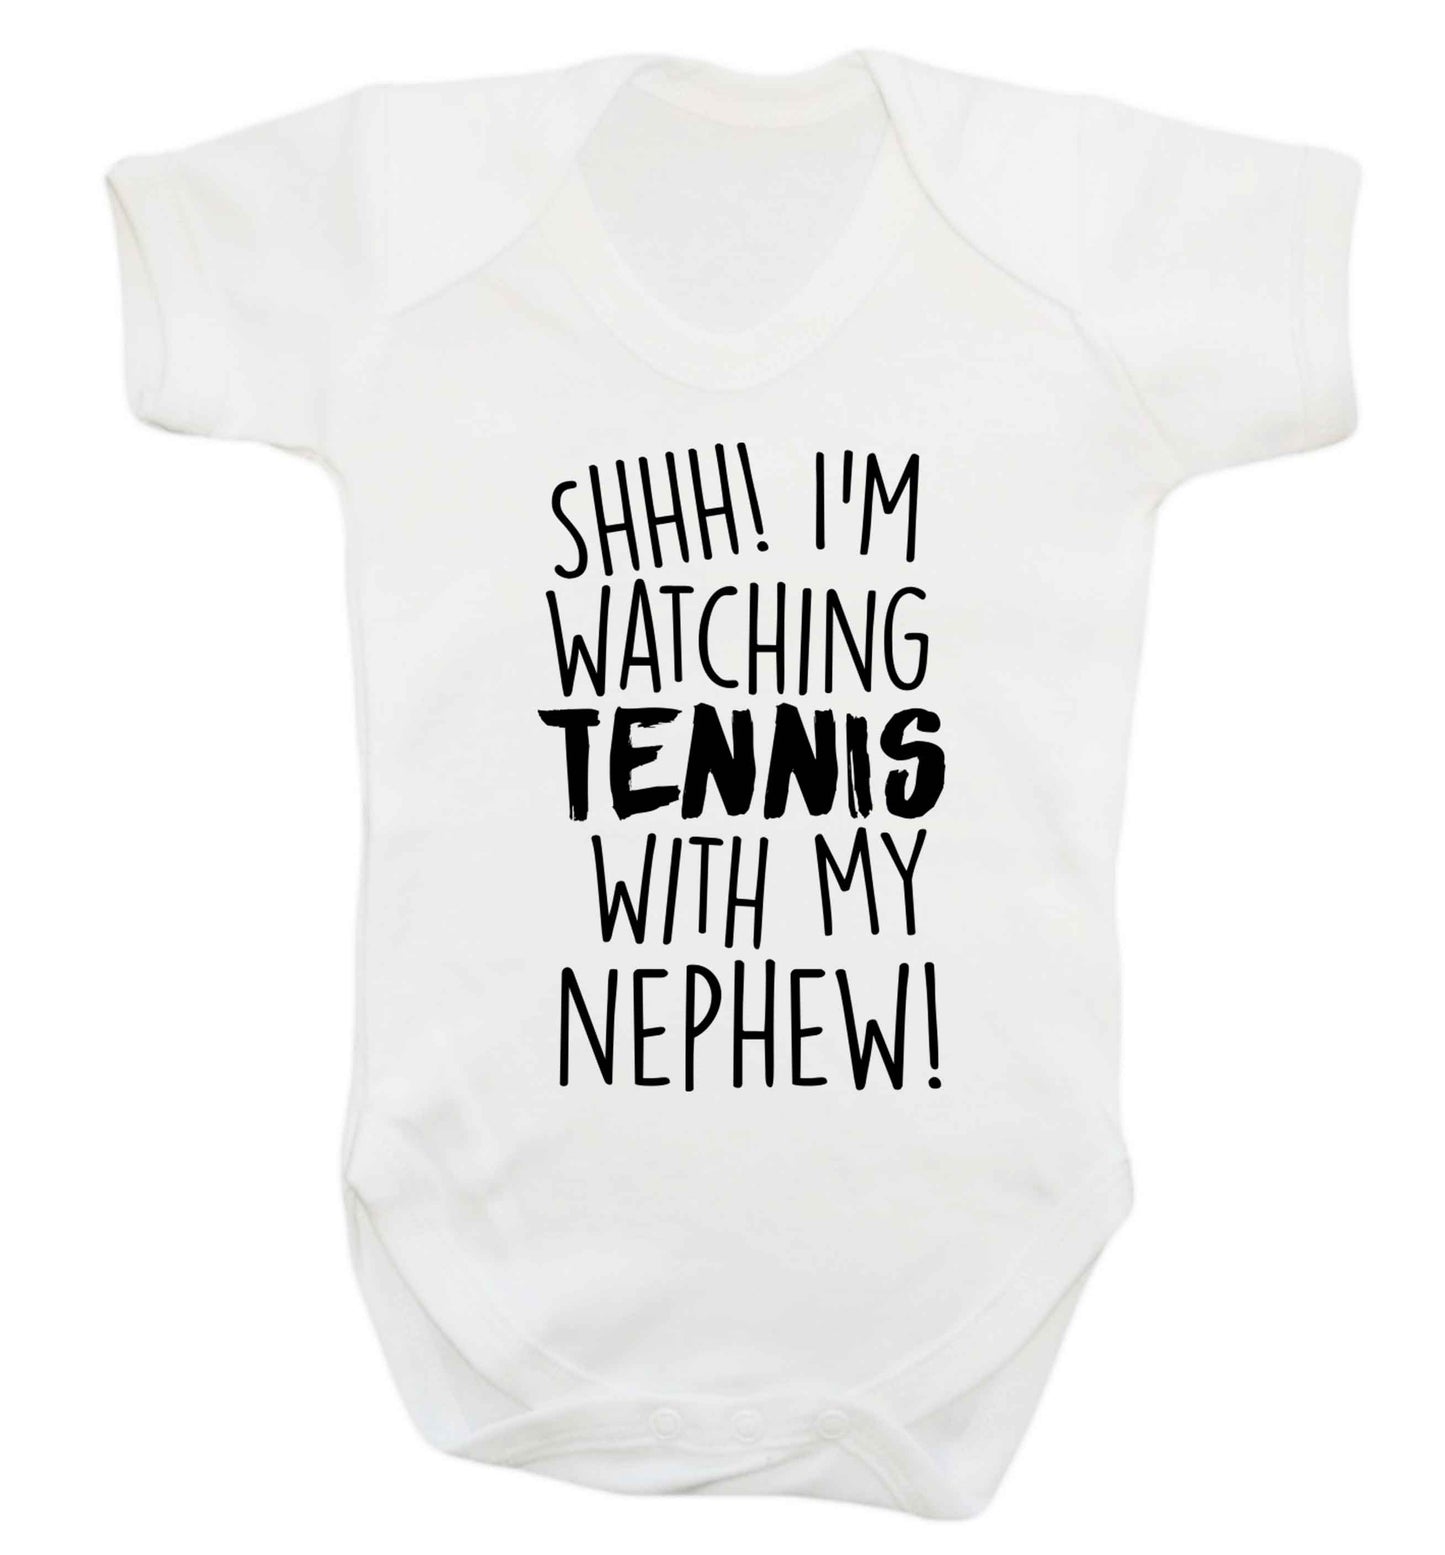 Shh! I'm watching tennis with my nephew! Baby Vest white 18-24 months